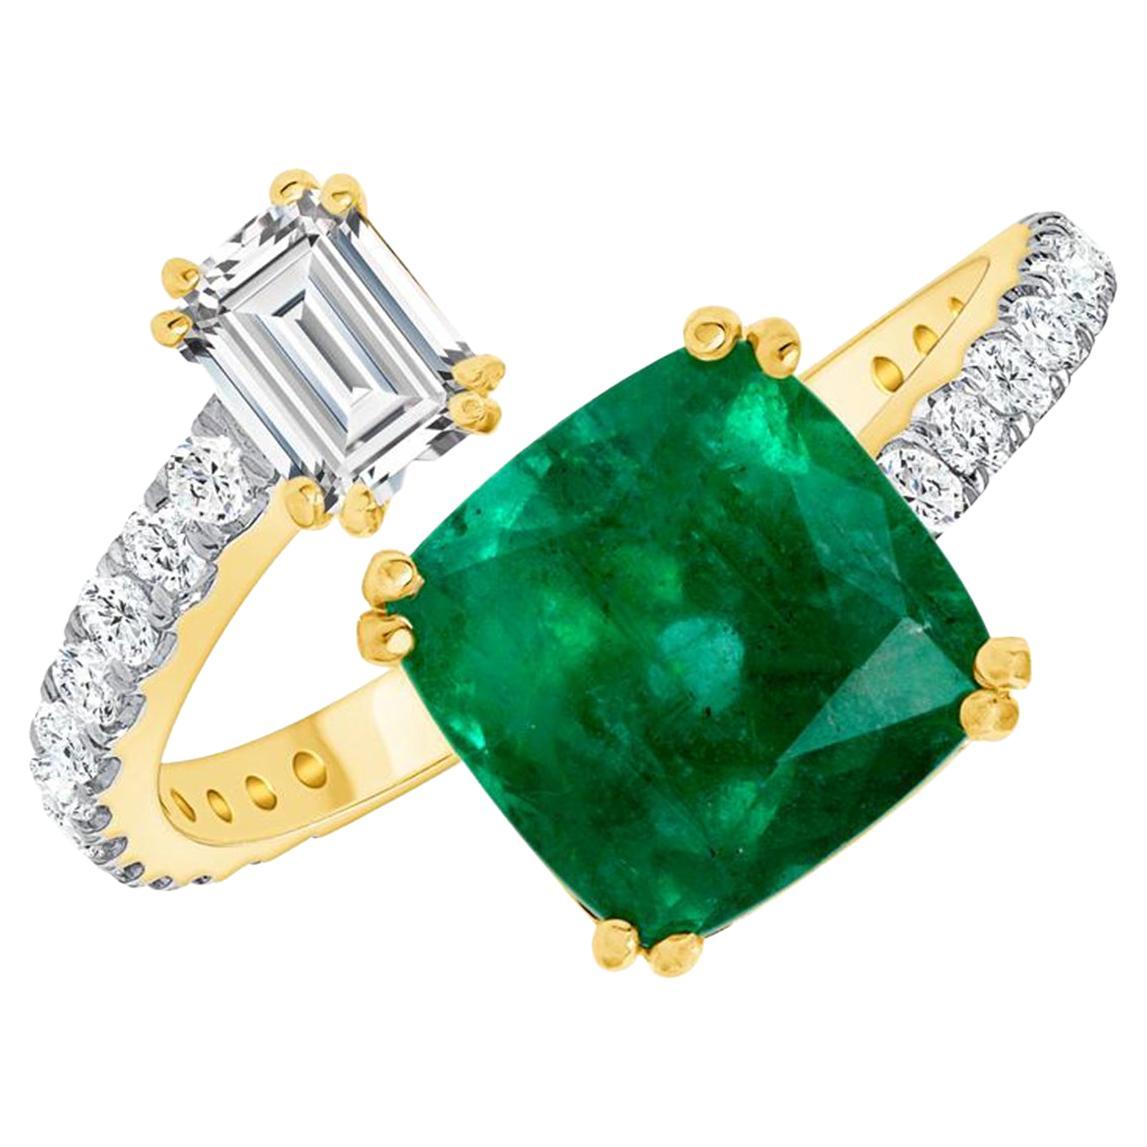 2.55 Ct Colombian Emerald & 0.52 Ct Diamonds in 14k Yellow Gold Engagement Ring For Sale